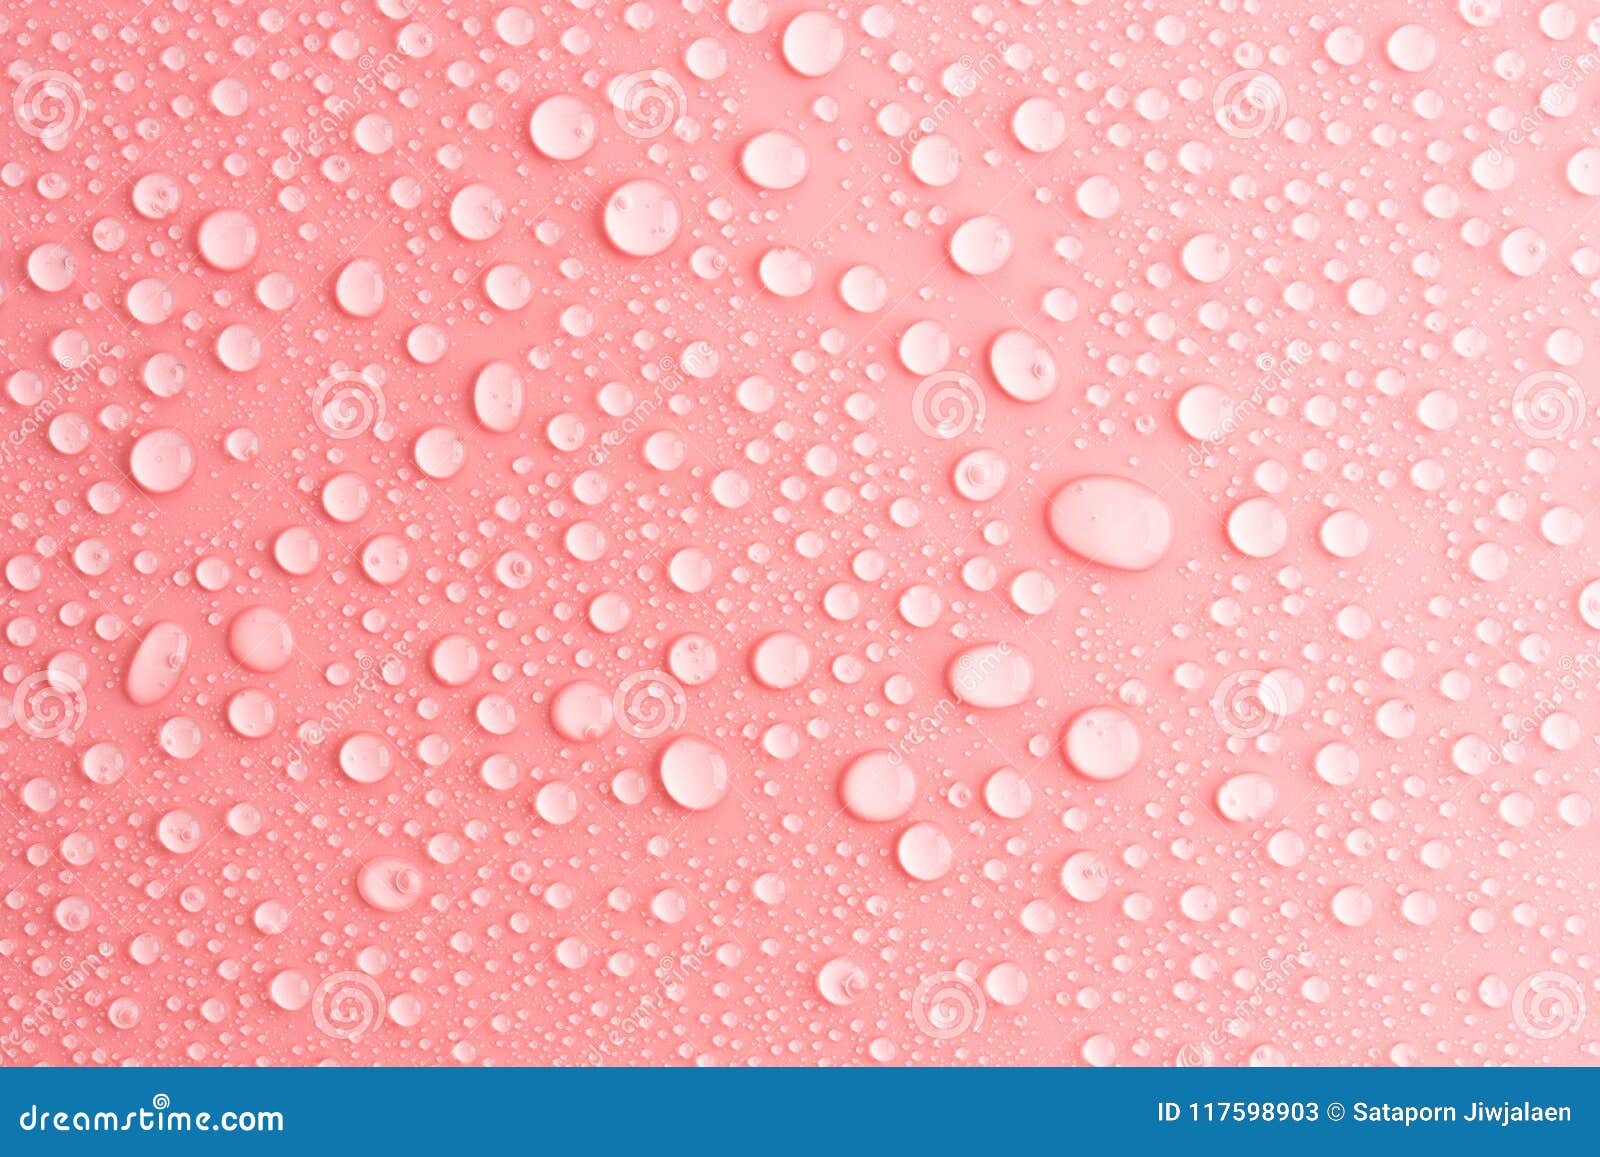 Water Drops Pink Background Stock Image Image Of Liquid Surface